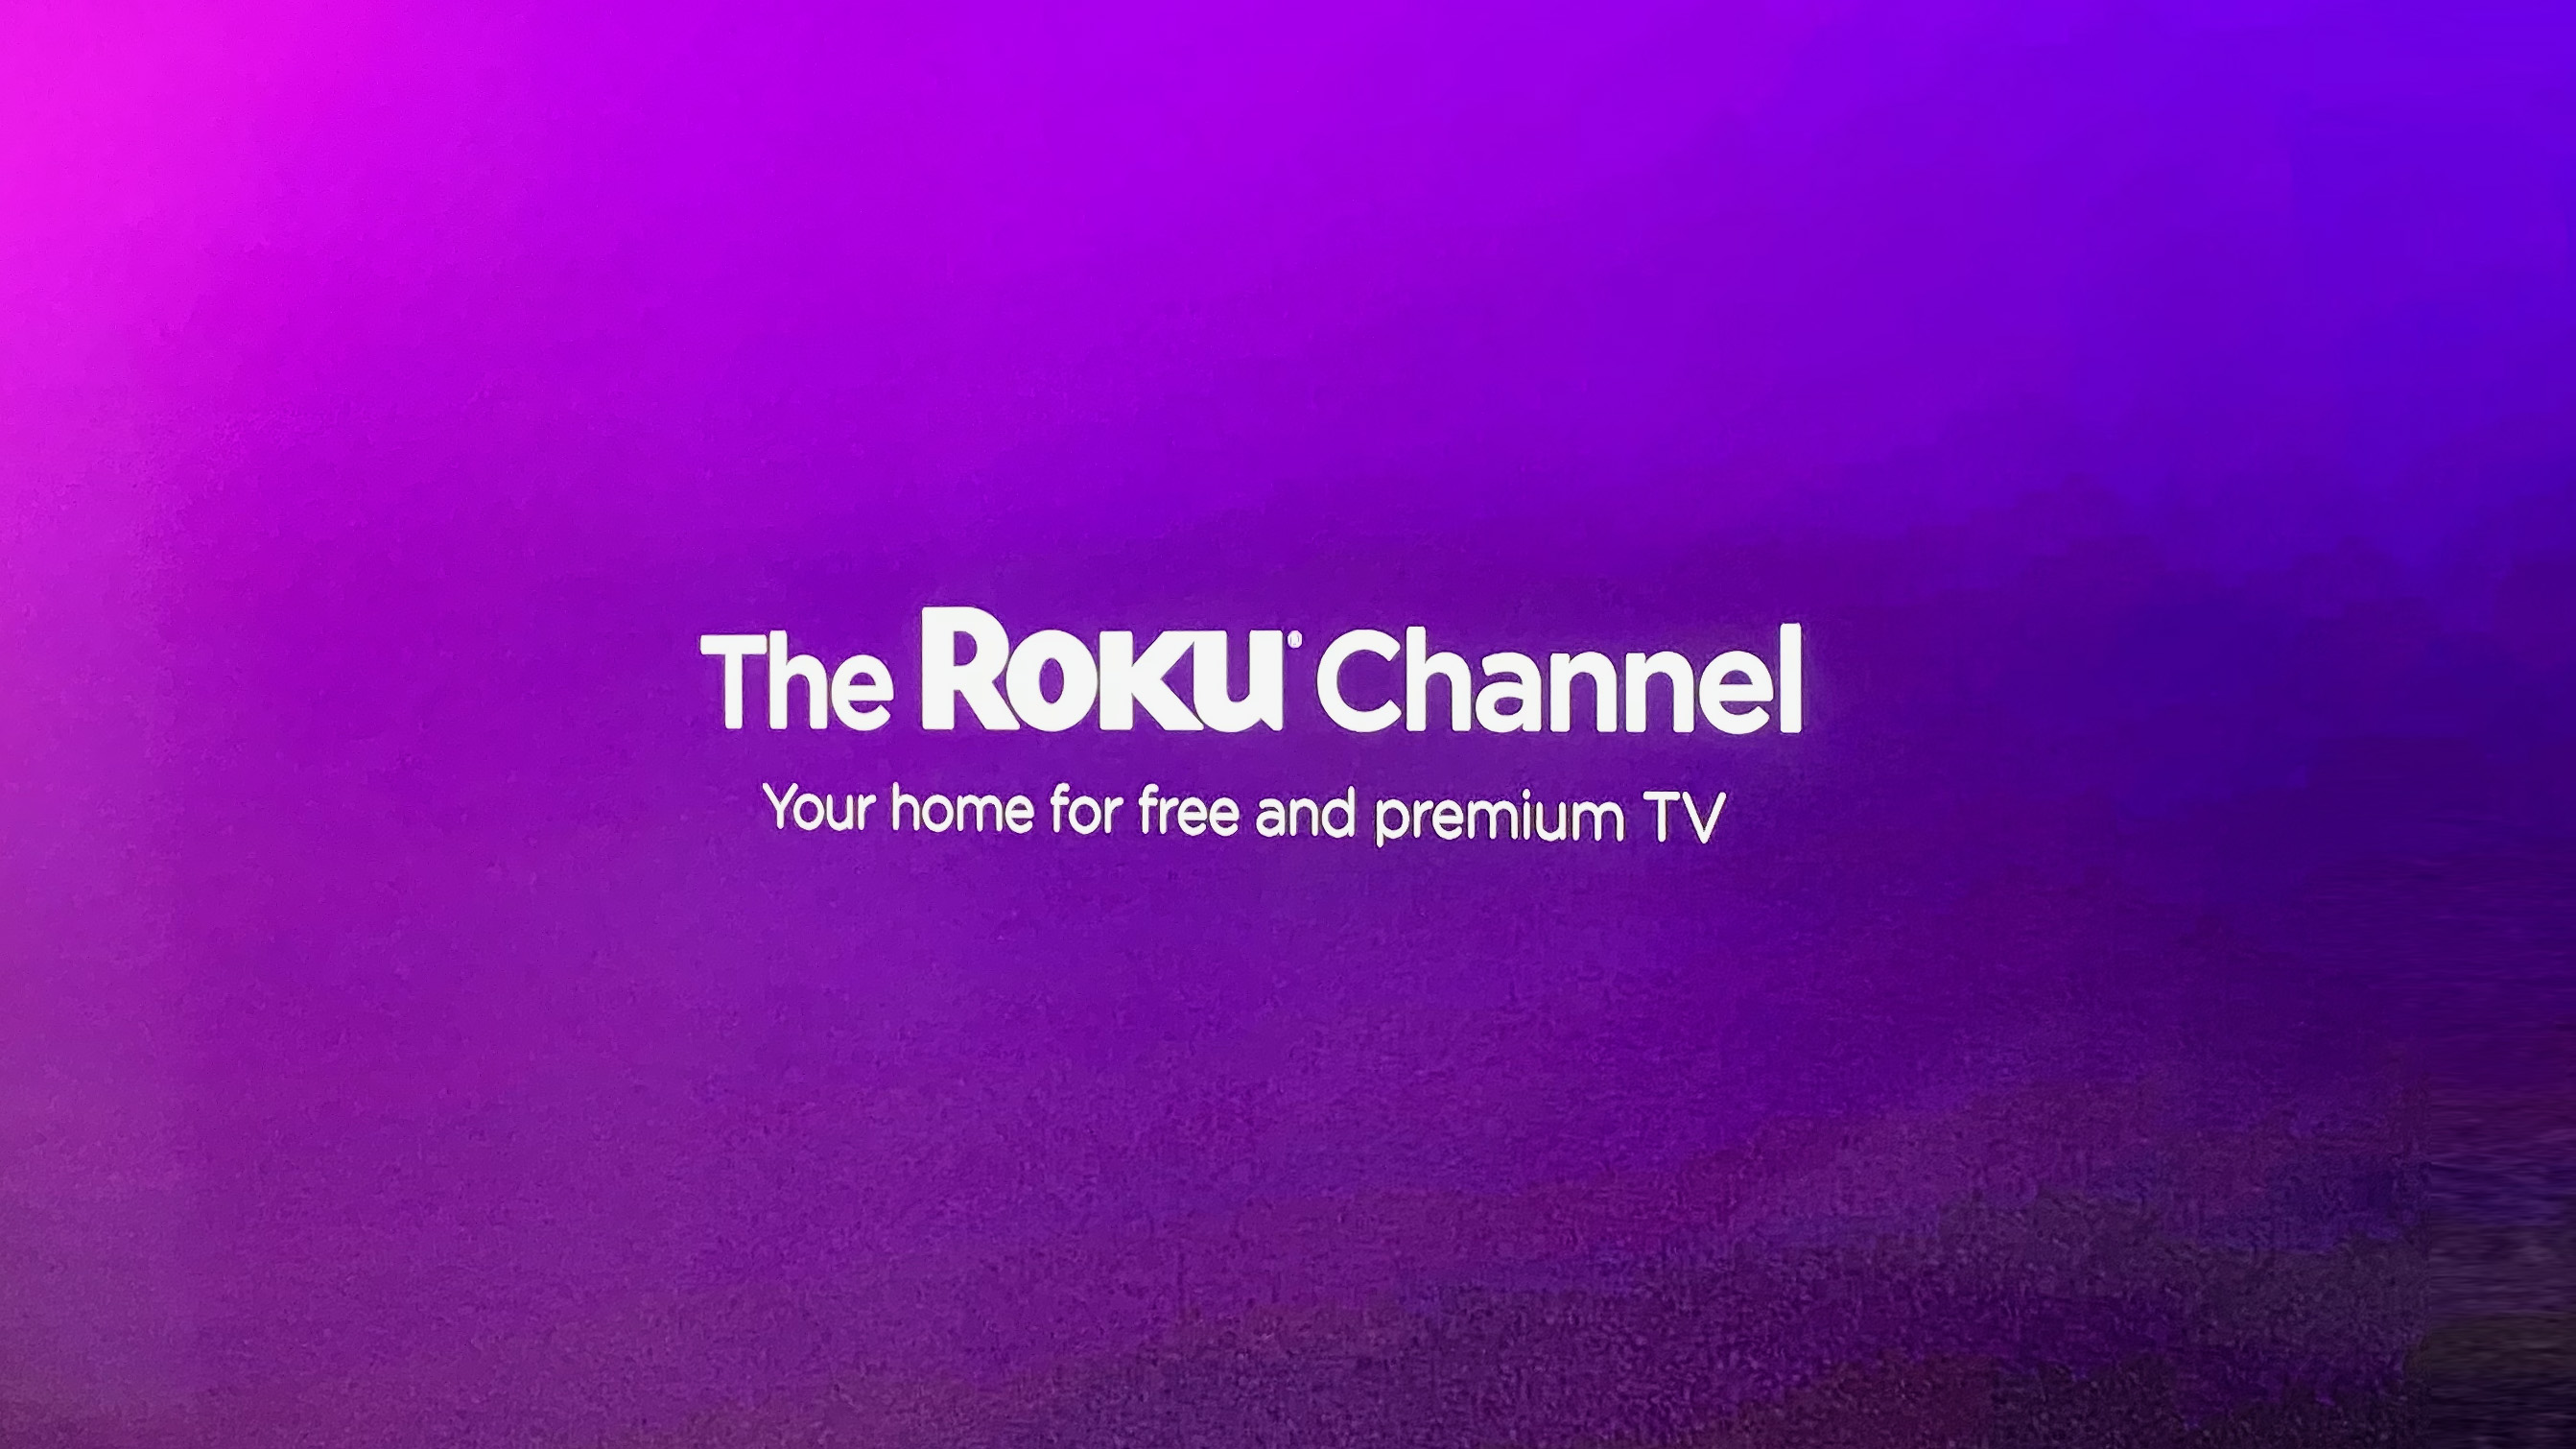 The Roku Channel Free movies and shows online What to Watch